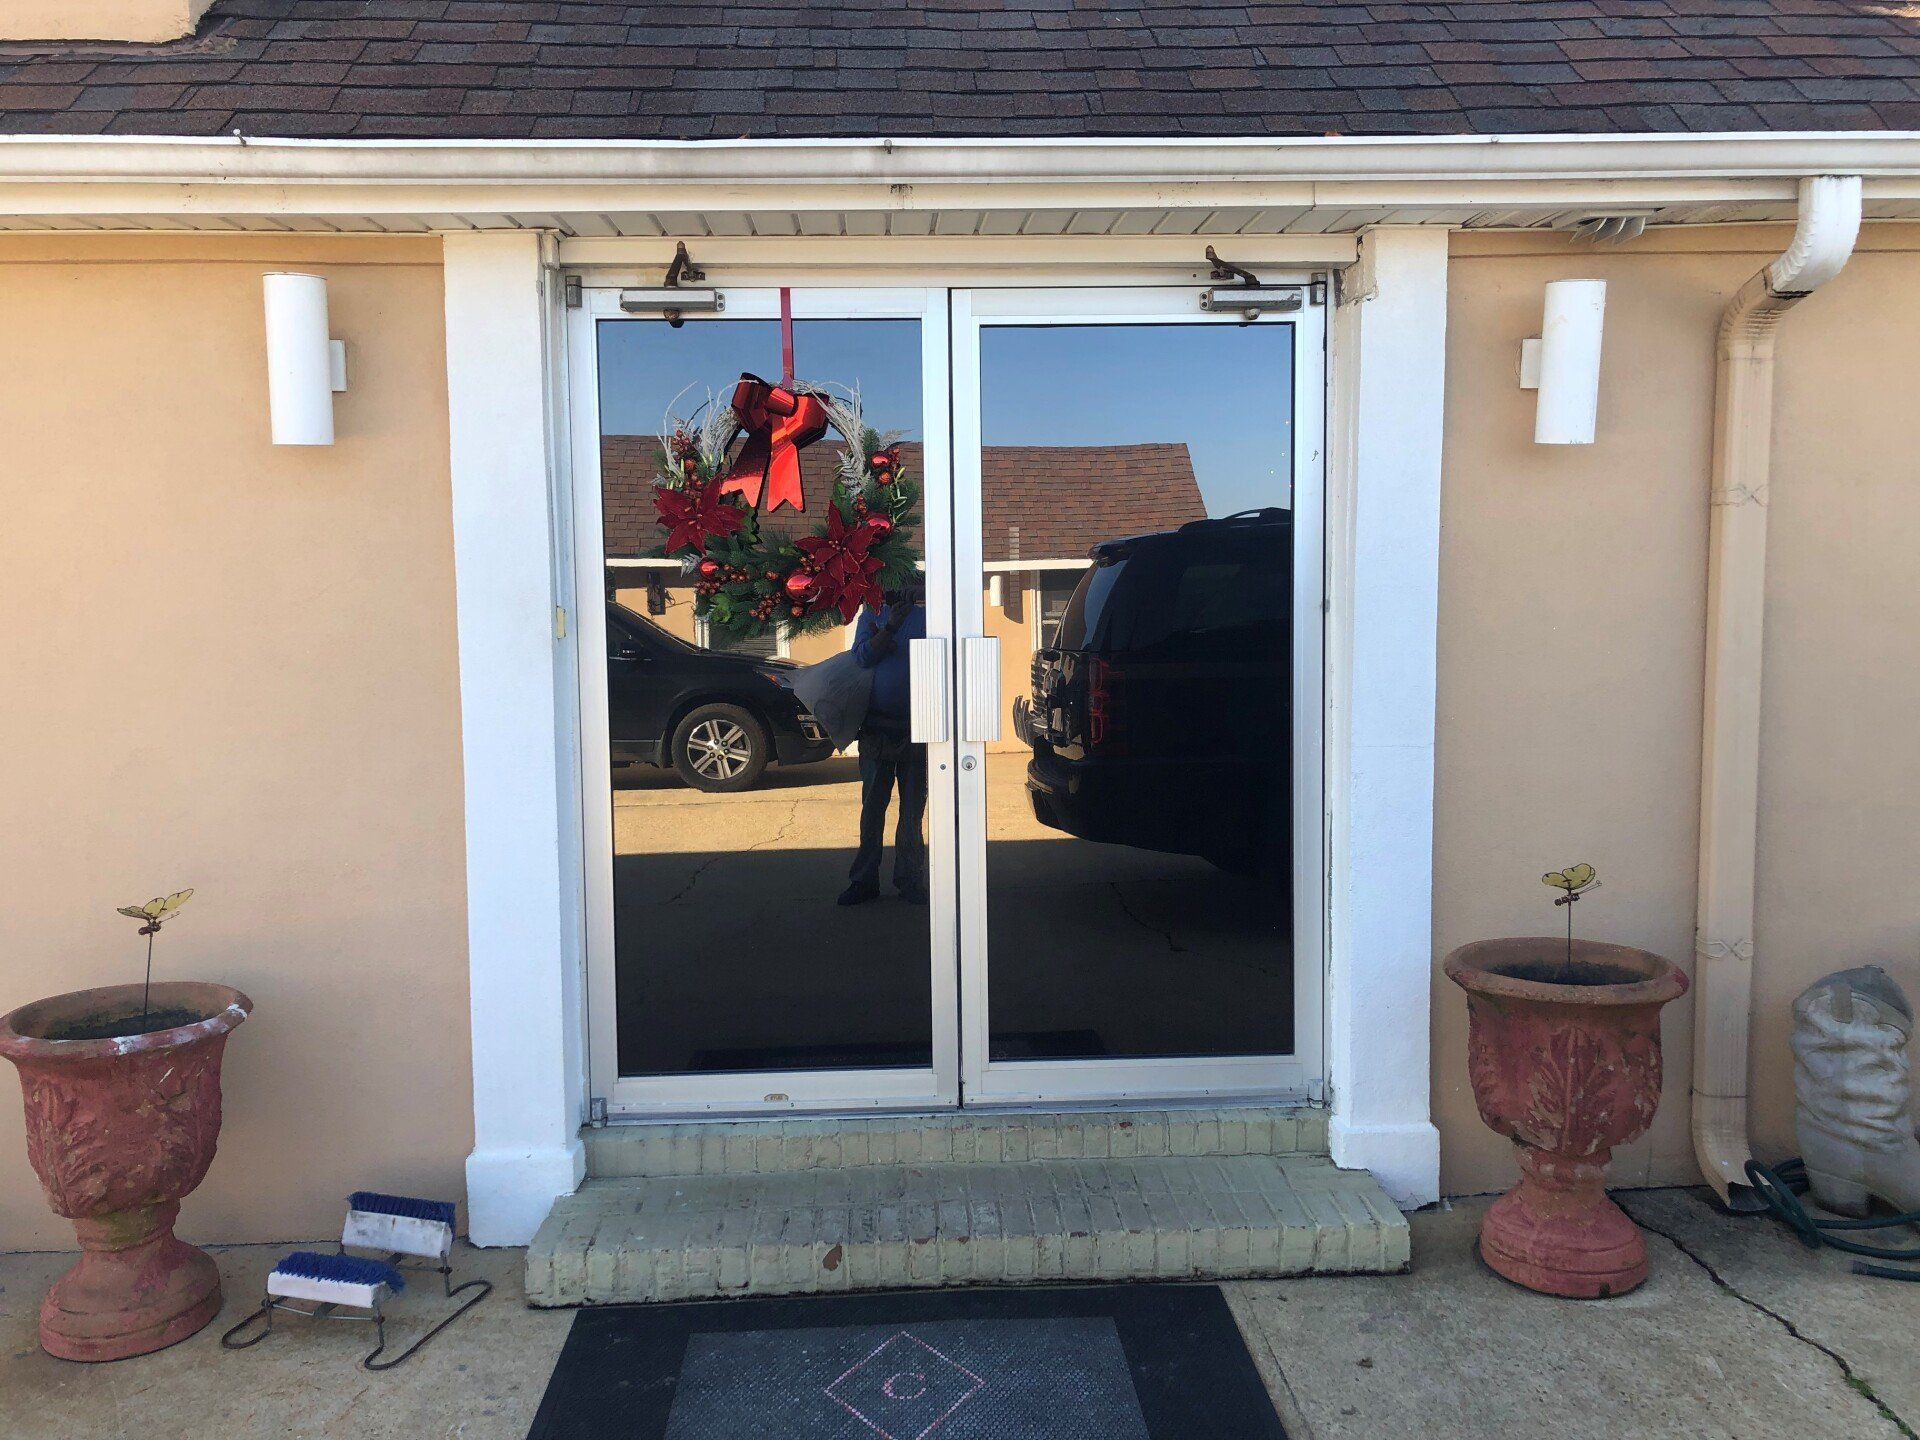 window tinting in Hope Hull AL - After SPF Leading-Performance Home Tint blocked maximum heat while creating visual clarity inside. Hope Hull, AL